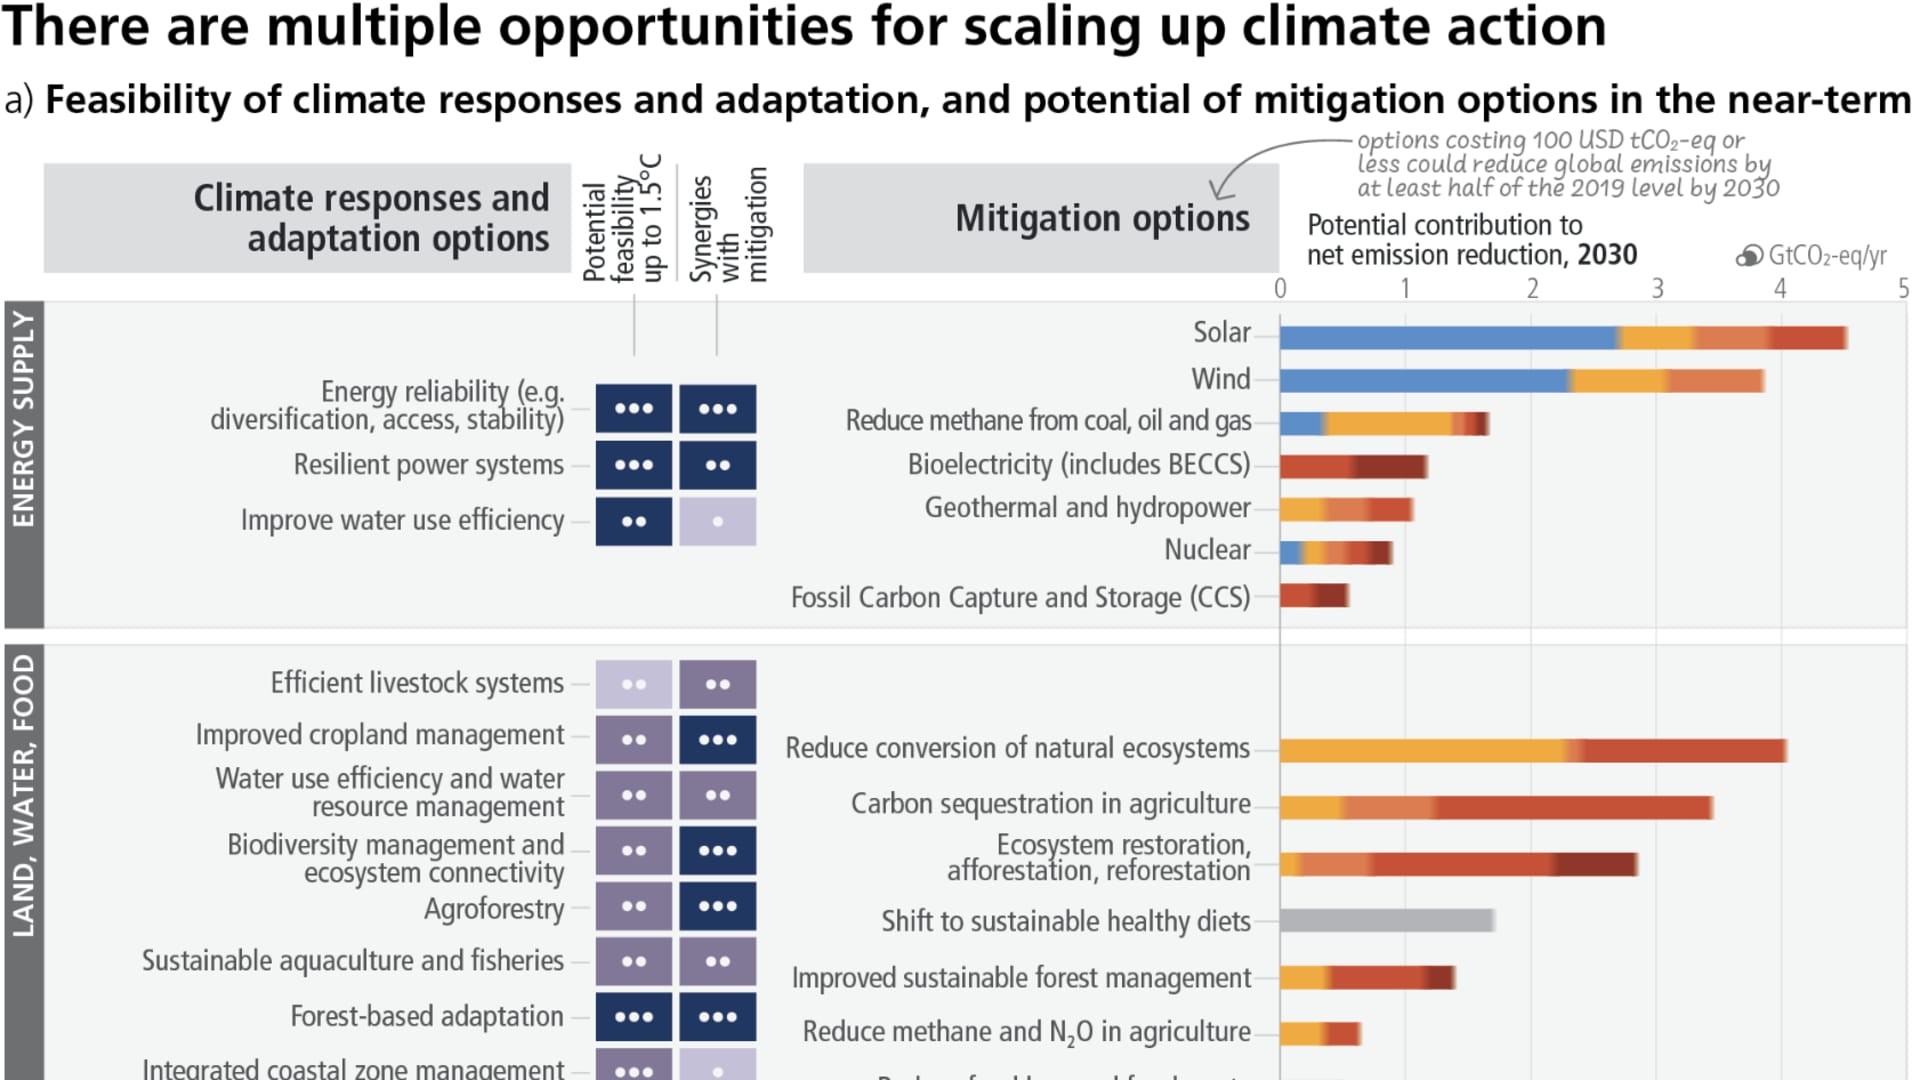 Responding to climate change requires overhauling virtually all major systems including energy supplies, how food is produced, how water is managed, and where people live, to name a few. This infographic highlights the relative climate impact of various responses and adaptations. This chart is from the Intergovernmental Panel on Climate Change (IPCC) Sixth Assessment Report.